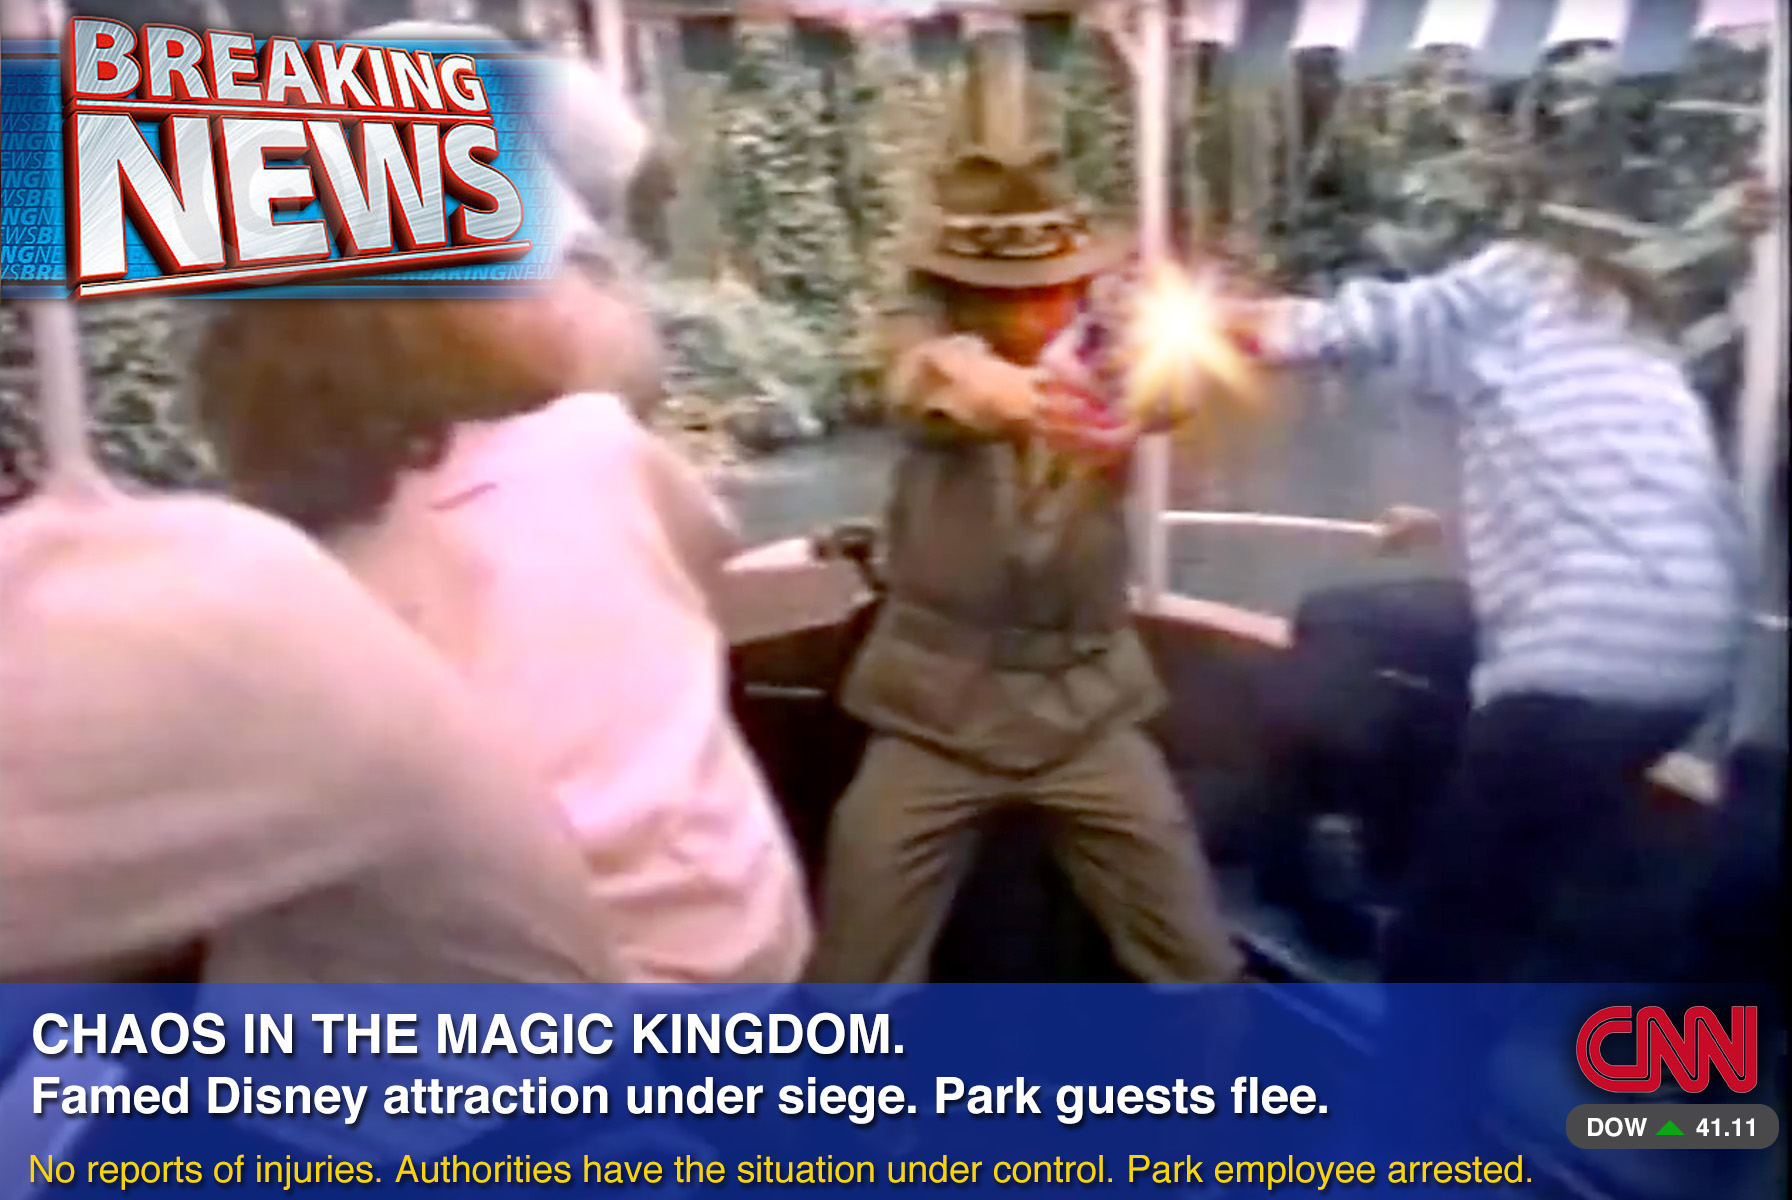 Disneyland's 35th Anniversary Special Chaos on the Jungle Cruise